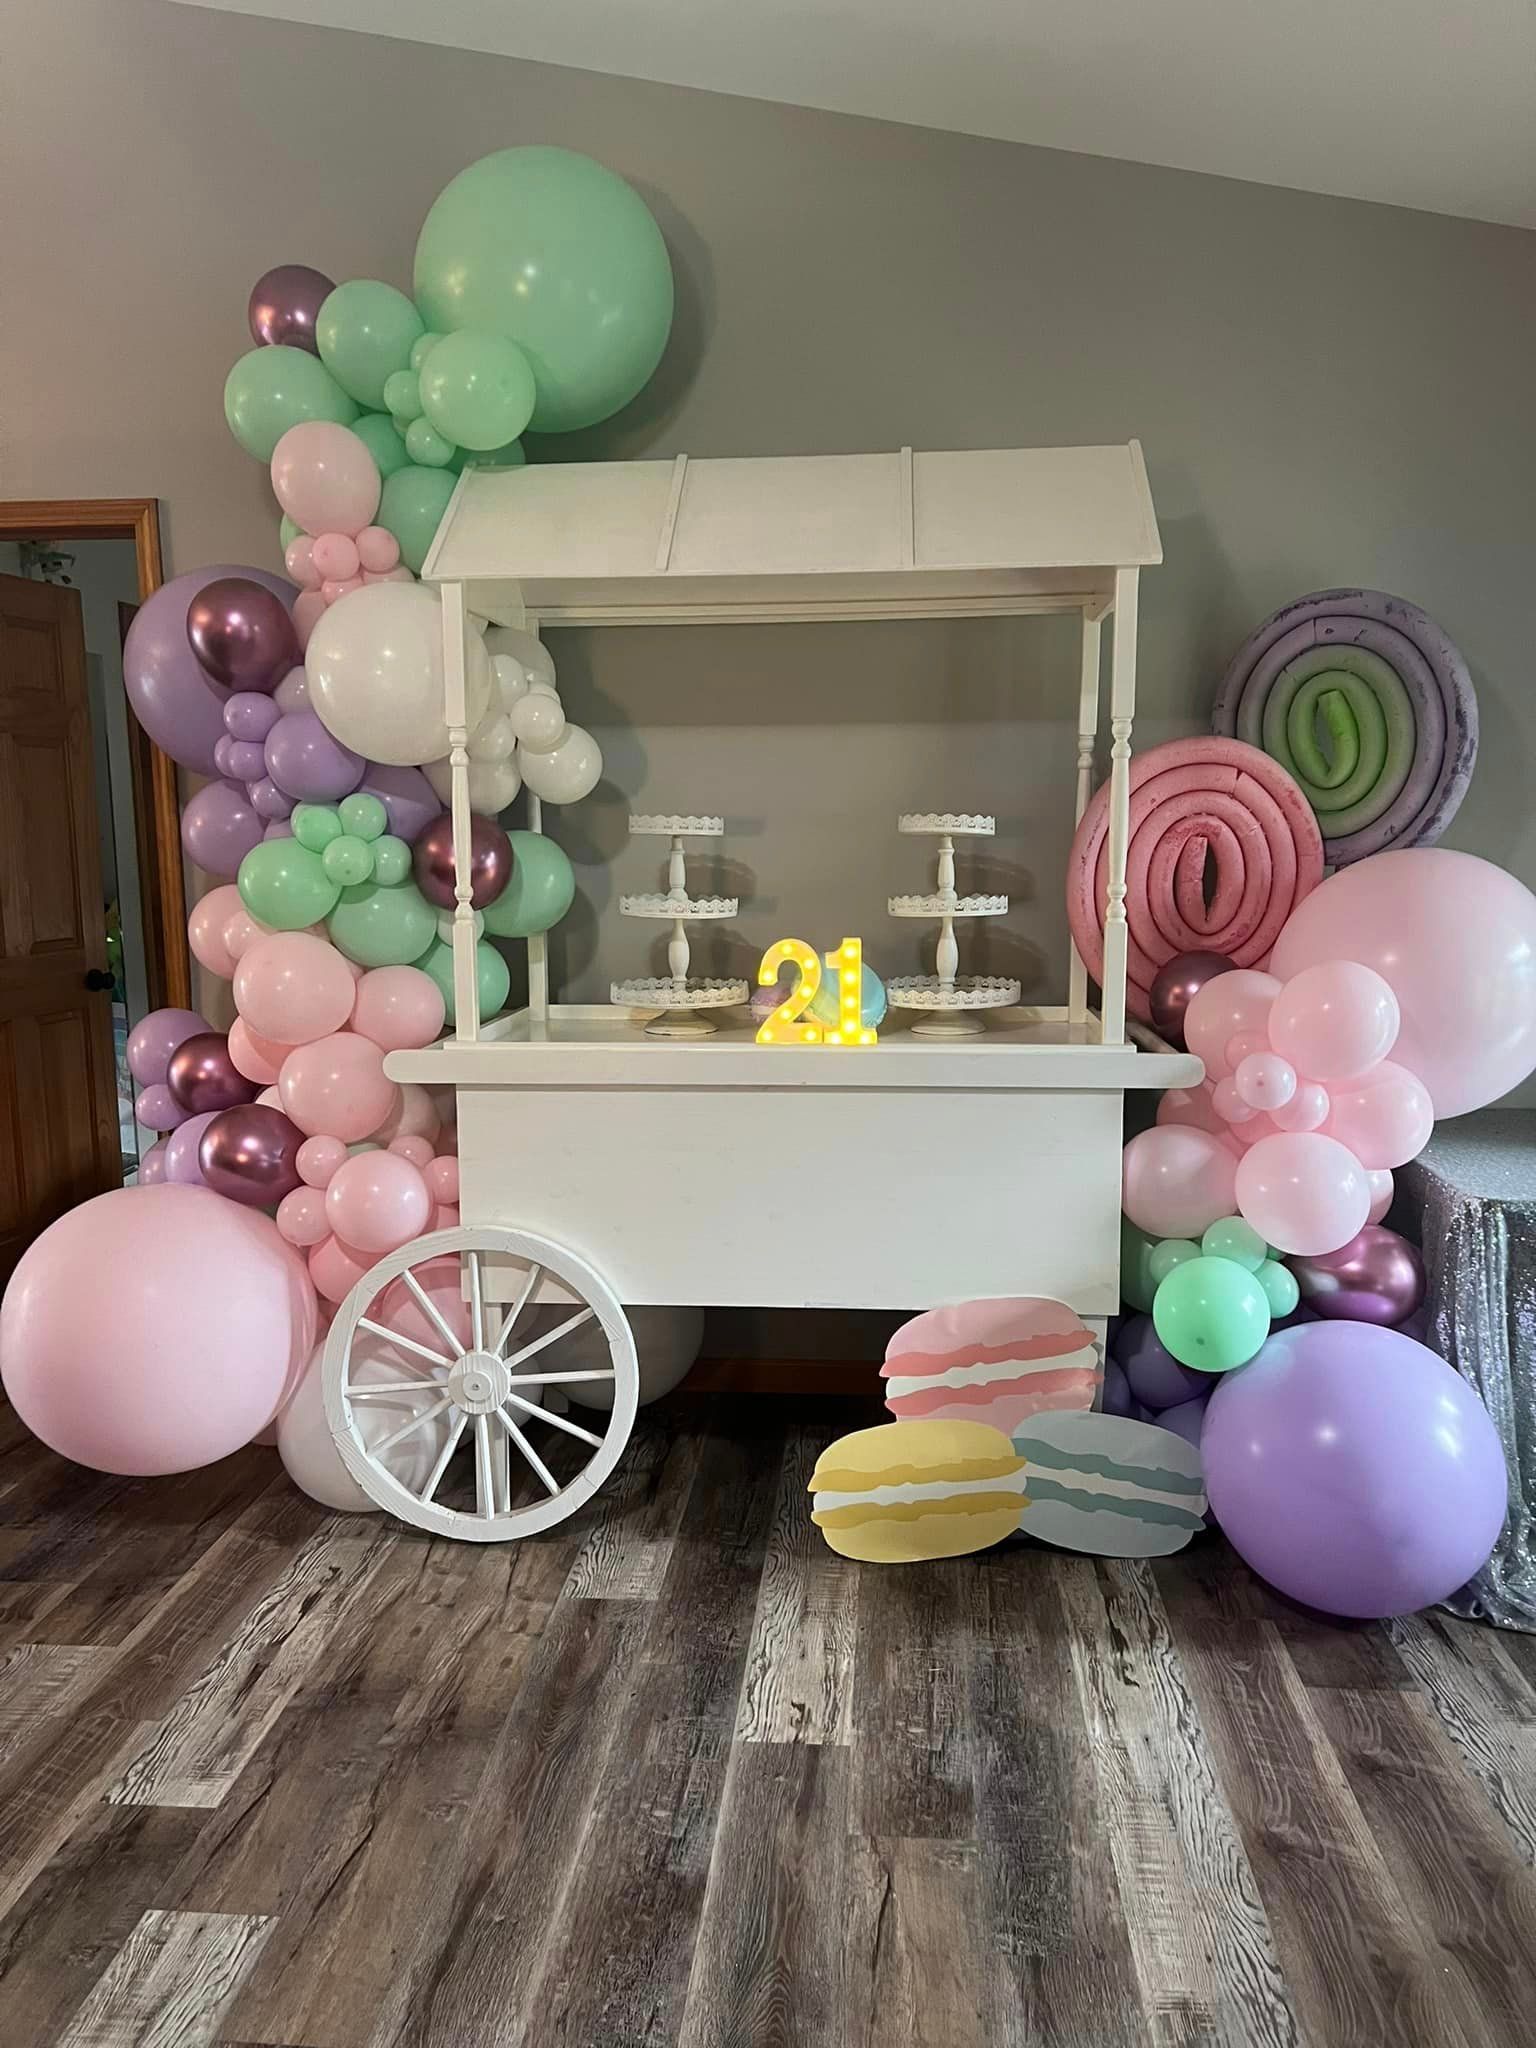 northwest indiana candy cart rental and balloon in a pastel candy land theme